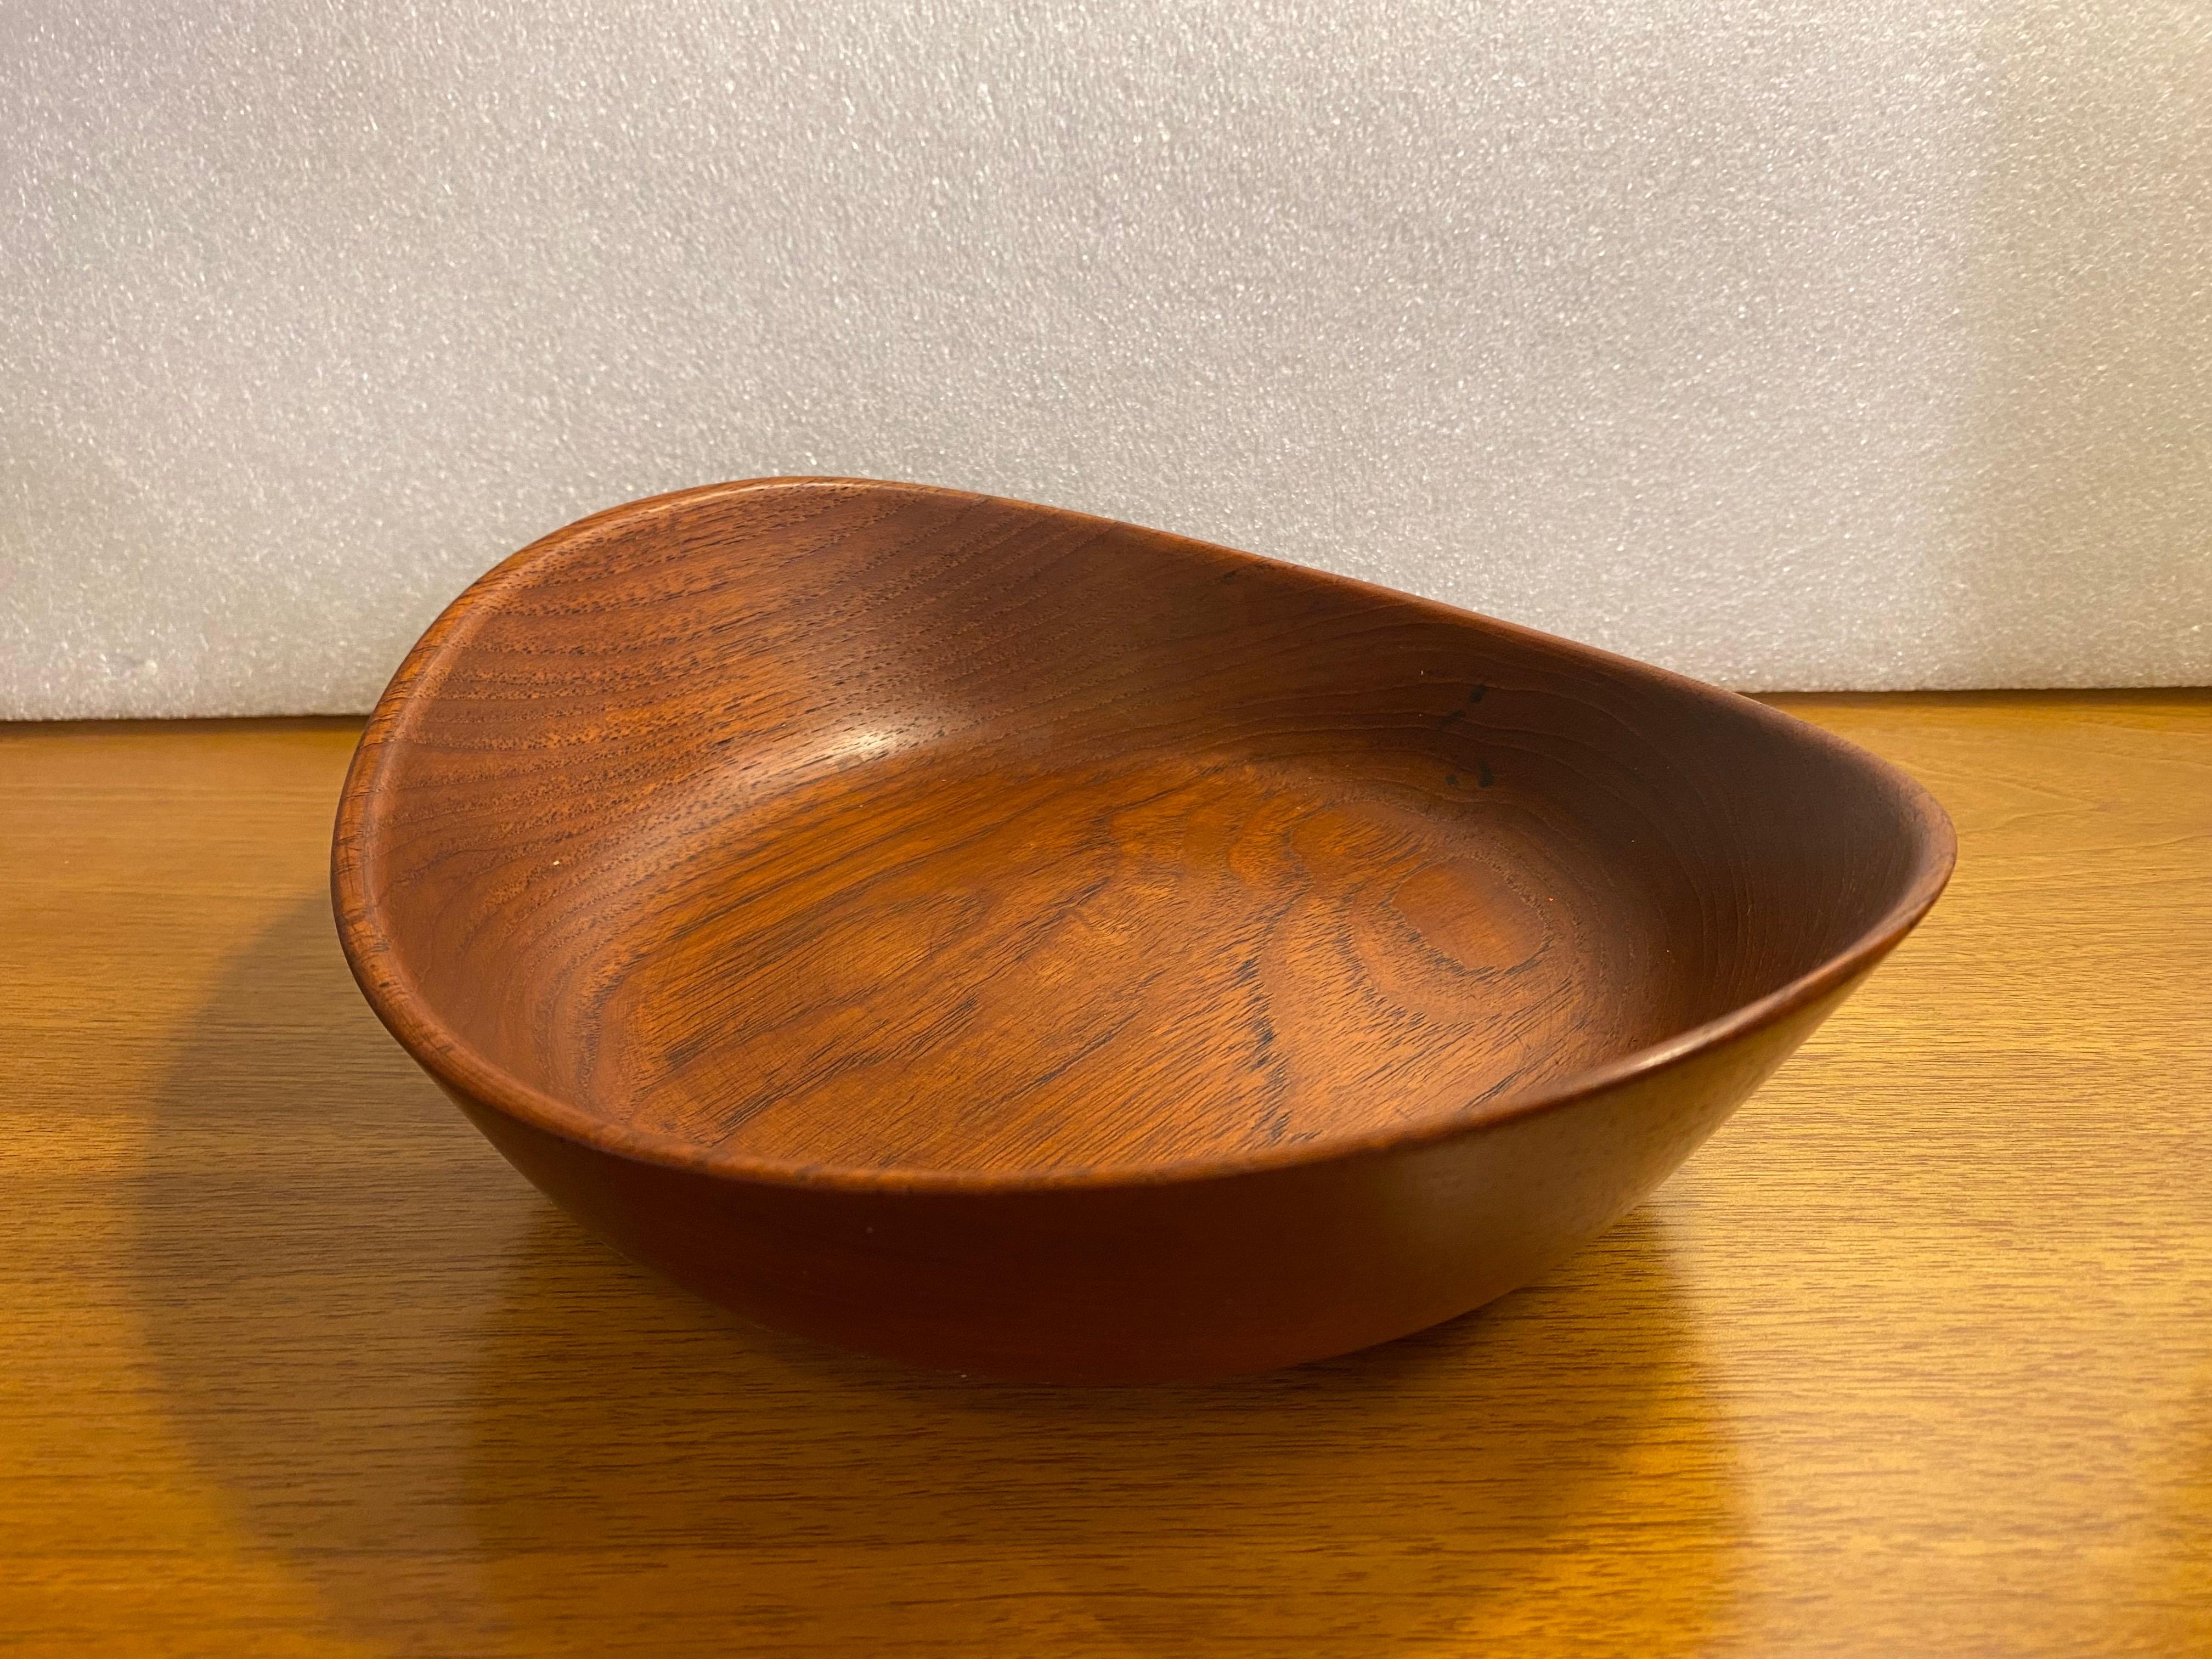 Finn Juhl for Kay Bojesen Teak Footed Bowl.  Finn Juhl designed some of the most beautiful items in the world and his series of turned wood bowls are no exception!  Turned from one piece of teak with 3 cone shaped wood feet.  Raised sculptural edges